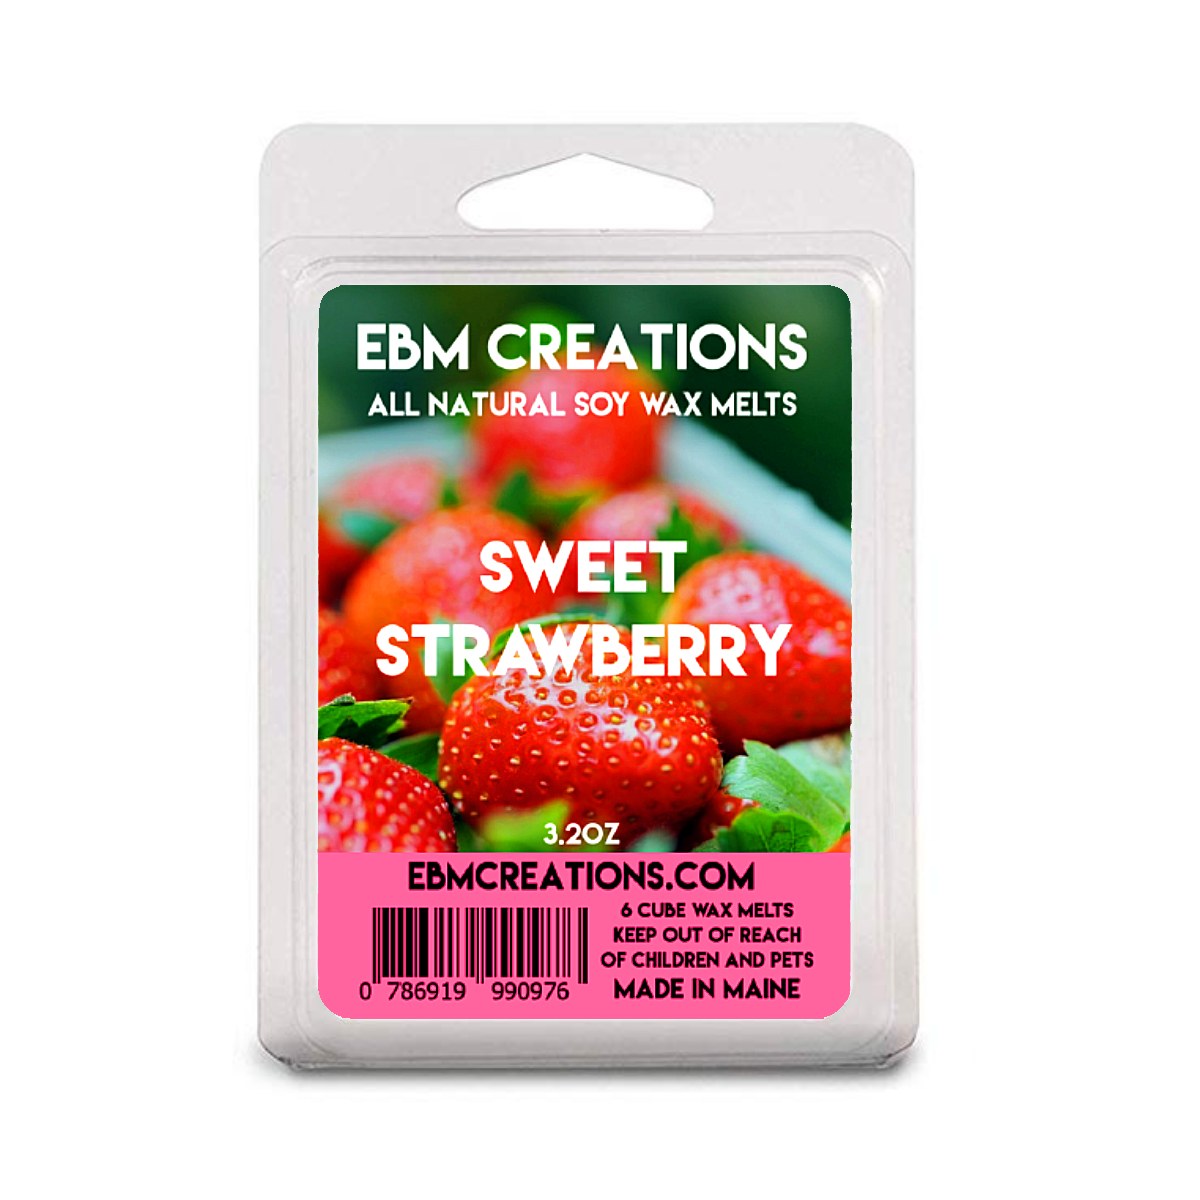 Sweet Strawberry - 3.2 oz Clamshell